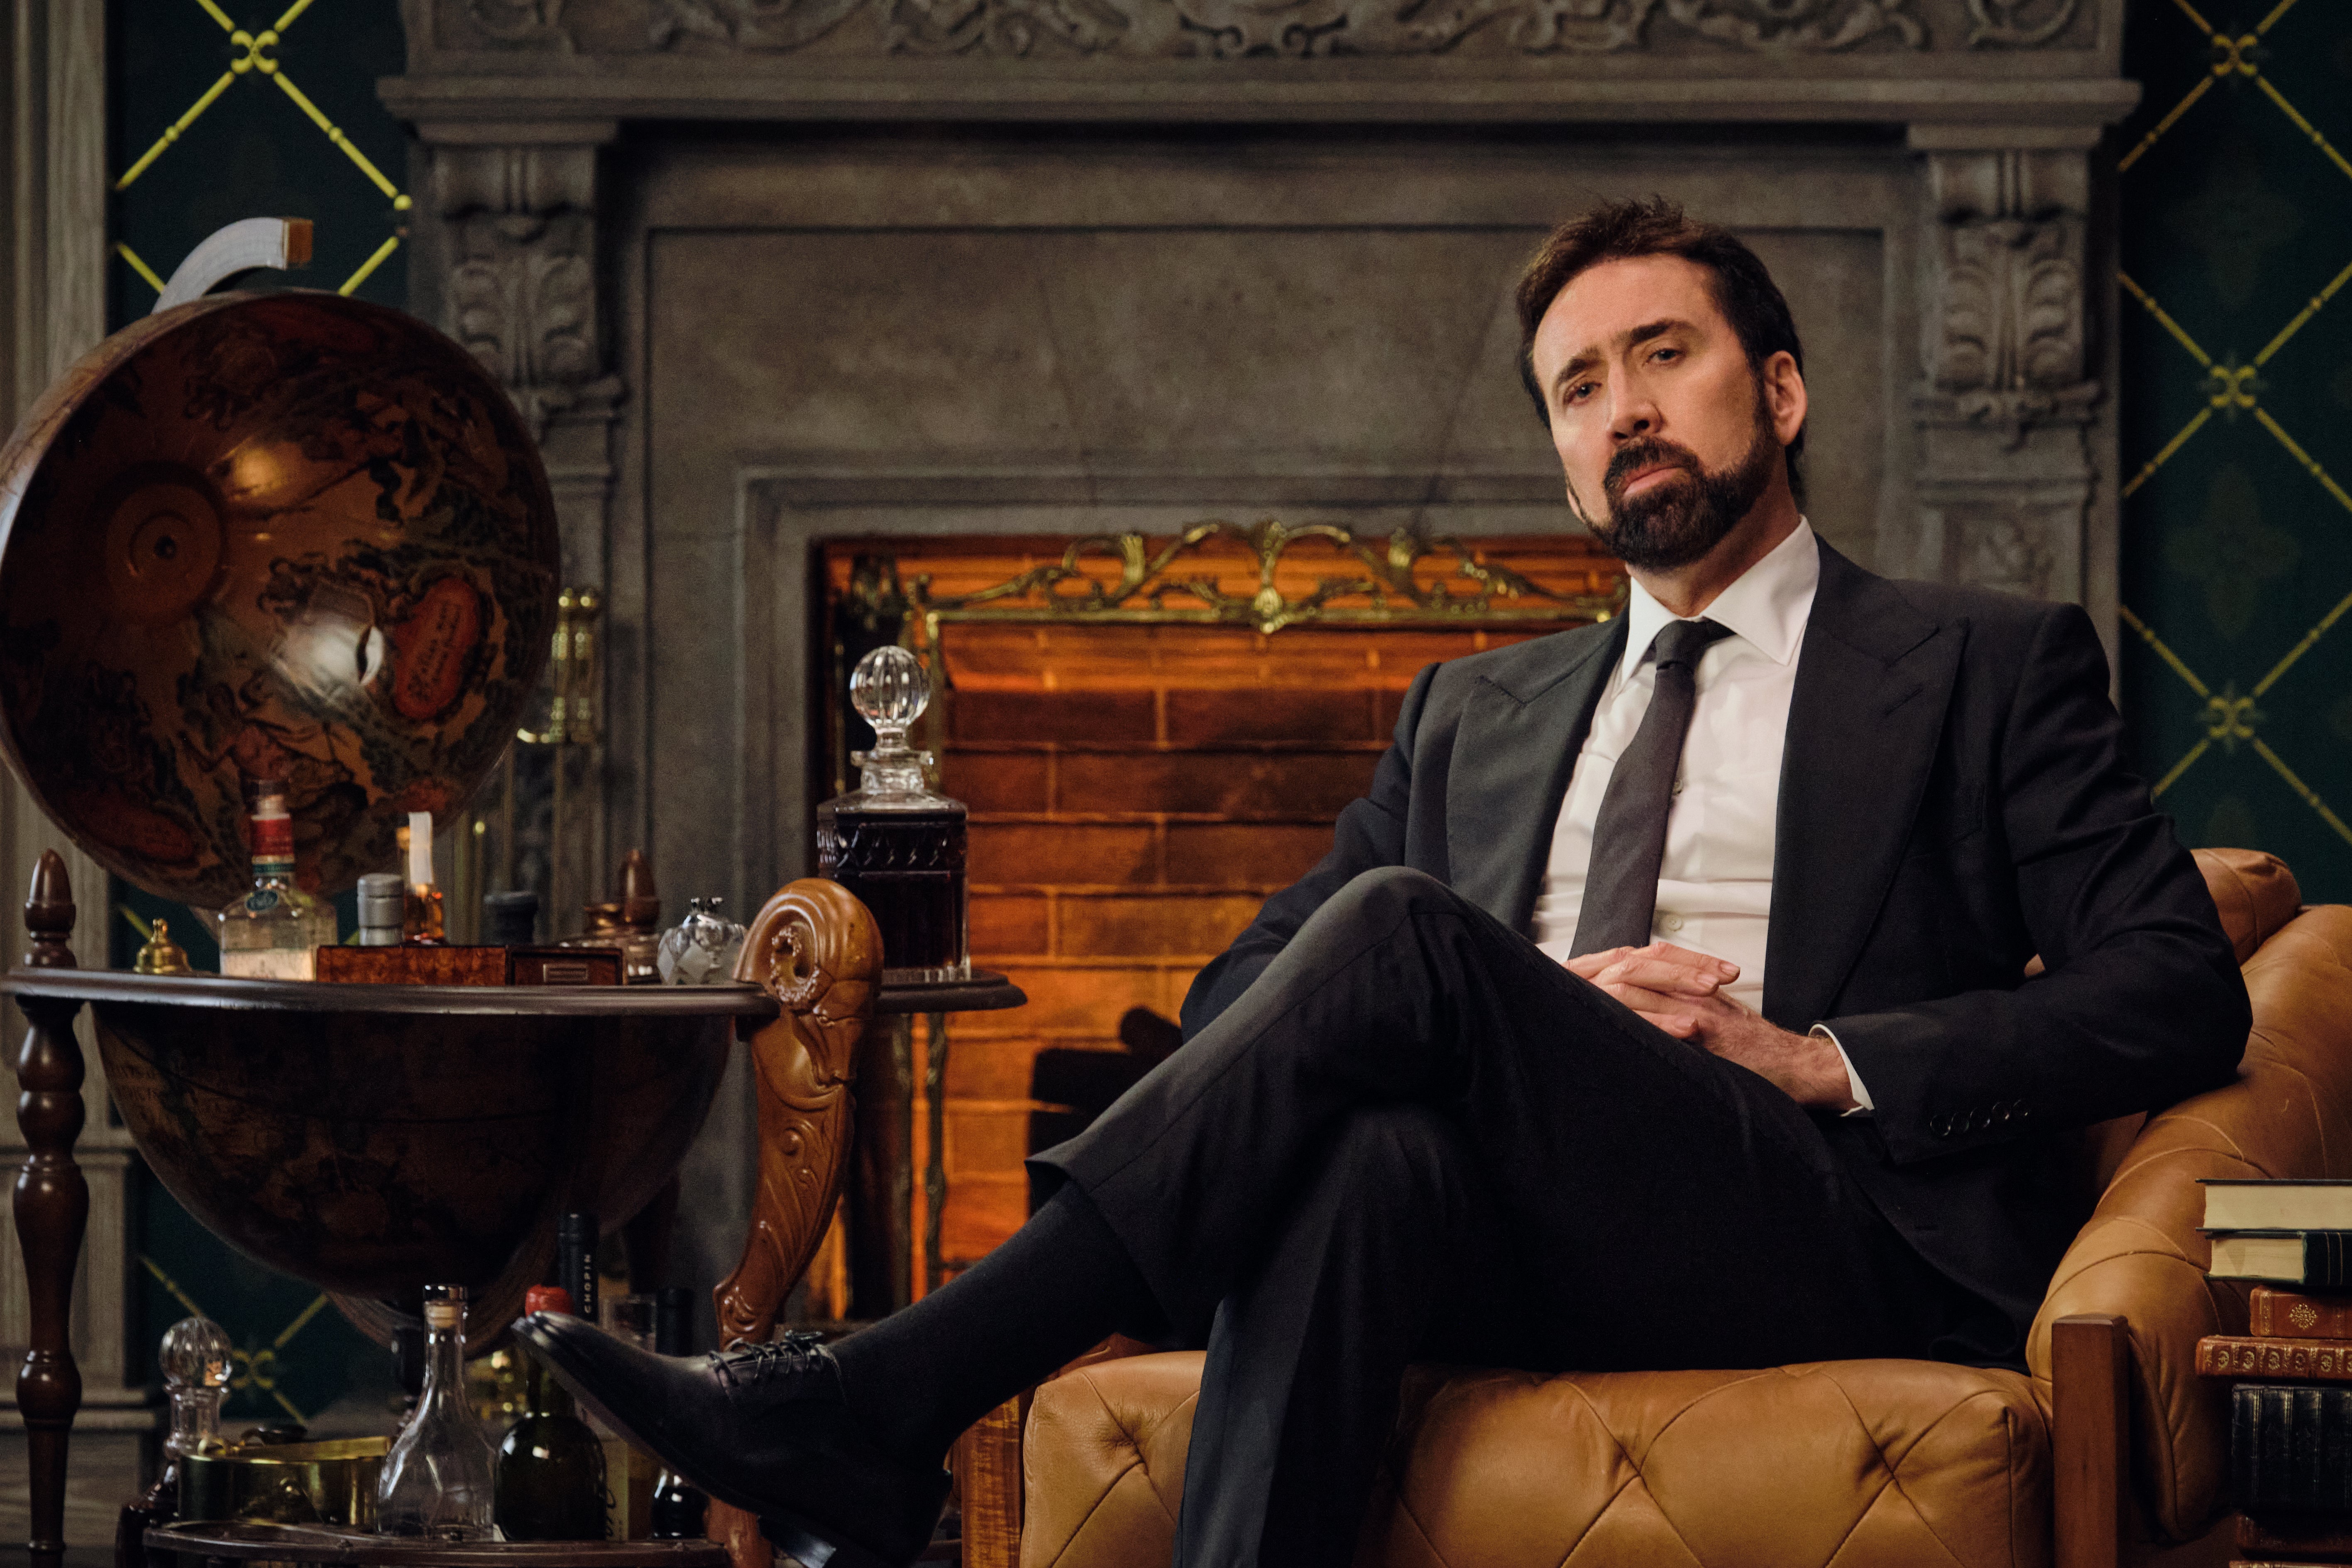 Nicolas Cage reclines in an armchair by a fire.